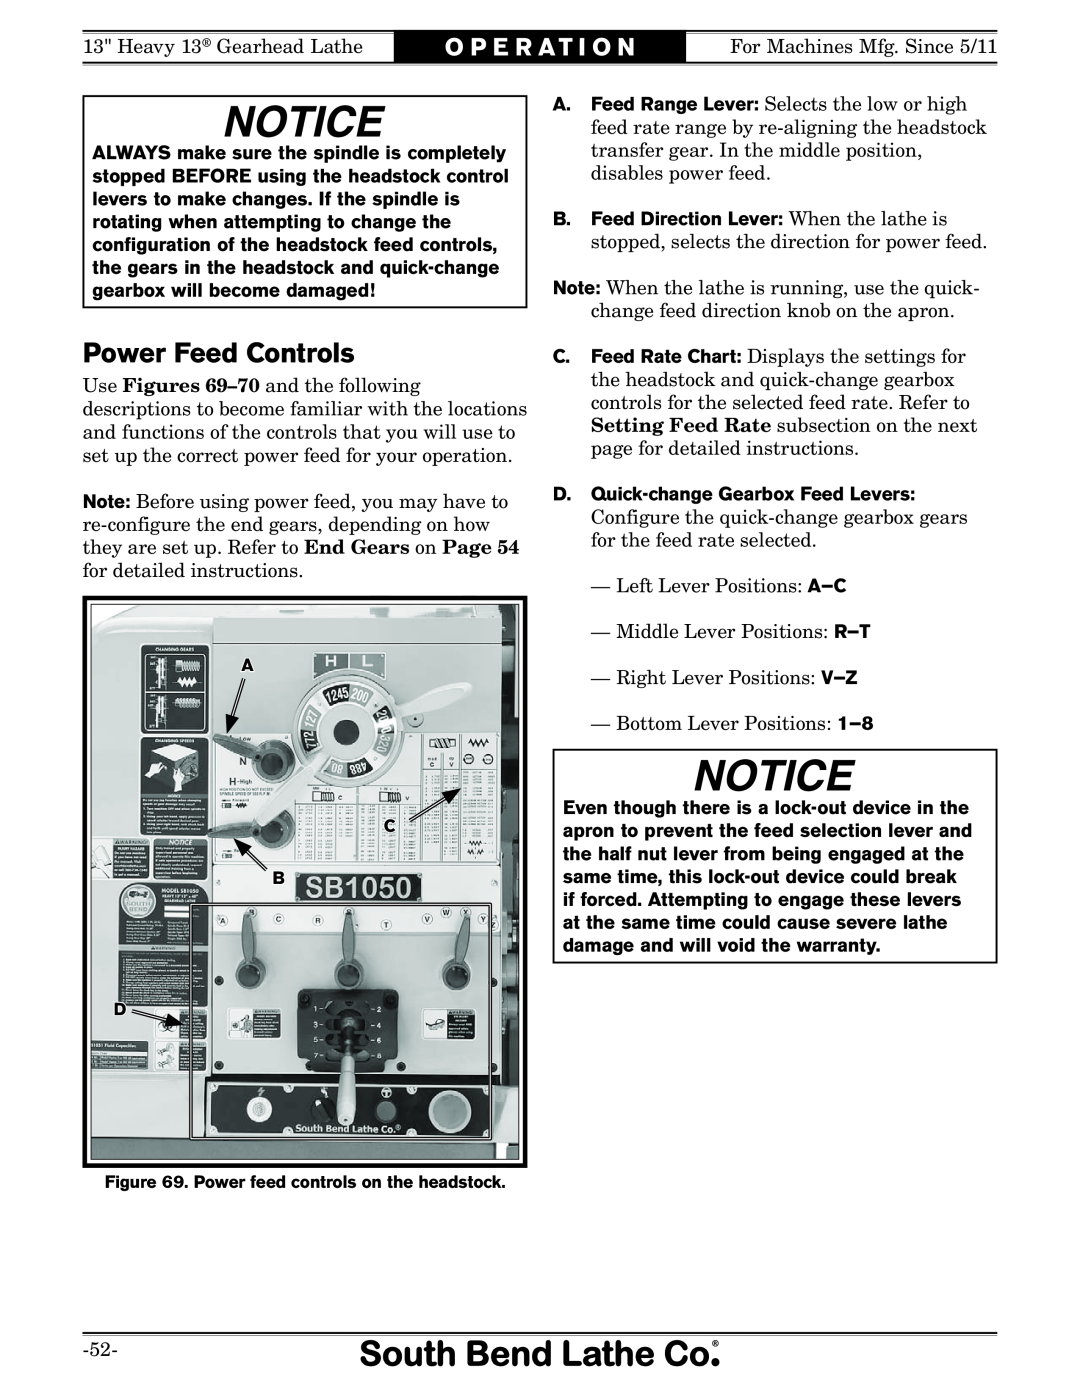 Southbend SB owner manual Power Feed Controls, D. Quick-change Gearbox Feed Levers, O P E R A T I O N 